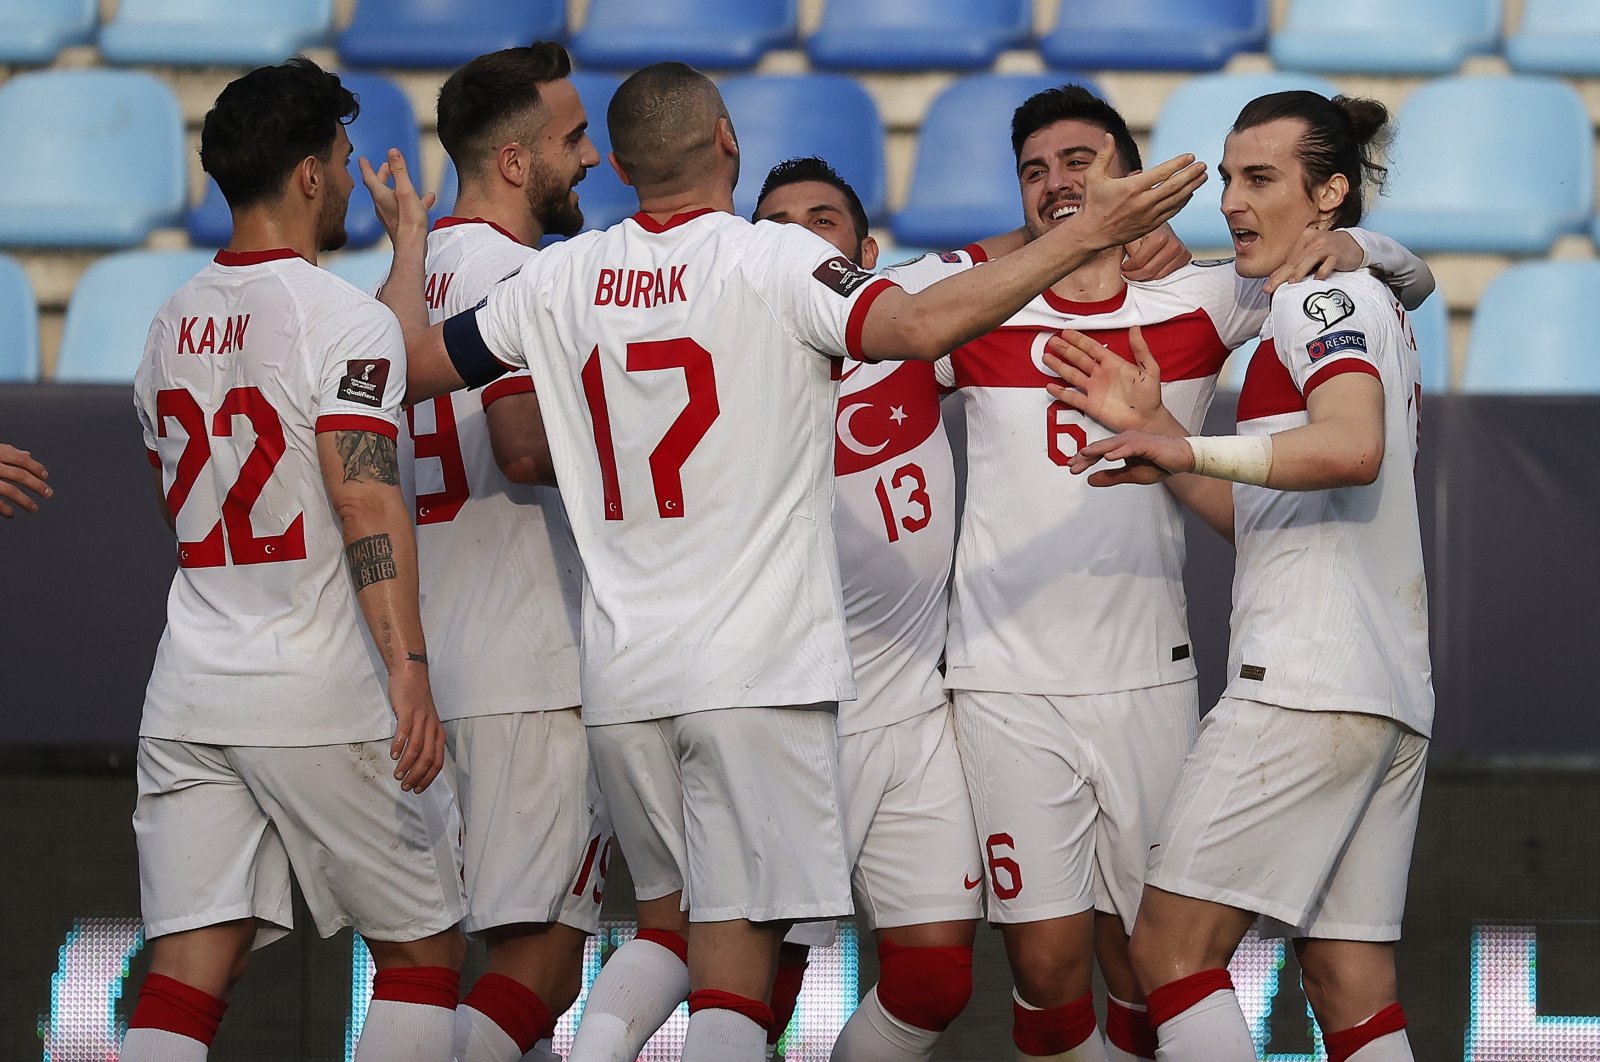 Turkish national team players celebrate a goal against Norway in the 2022 FIFA World Cup Europe Qualification Group G match at the La Rosaleda Stadium in Malaga, Spain, March 27, 2021. (AA photo).